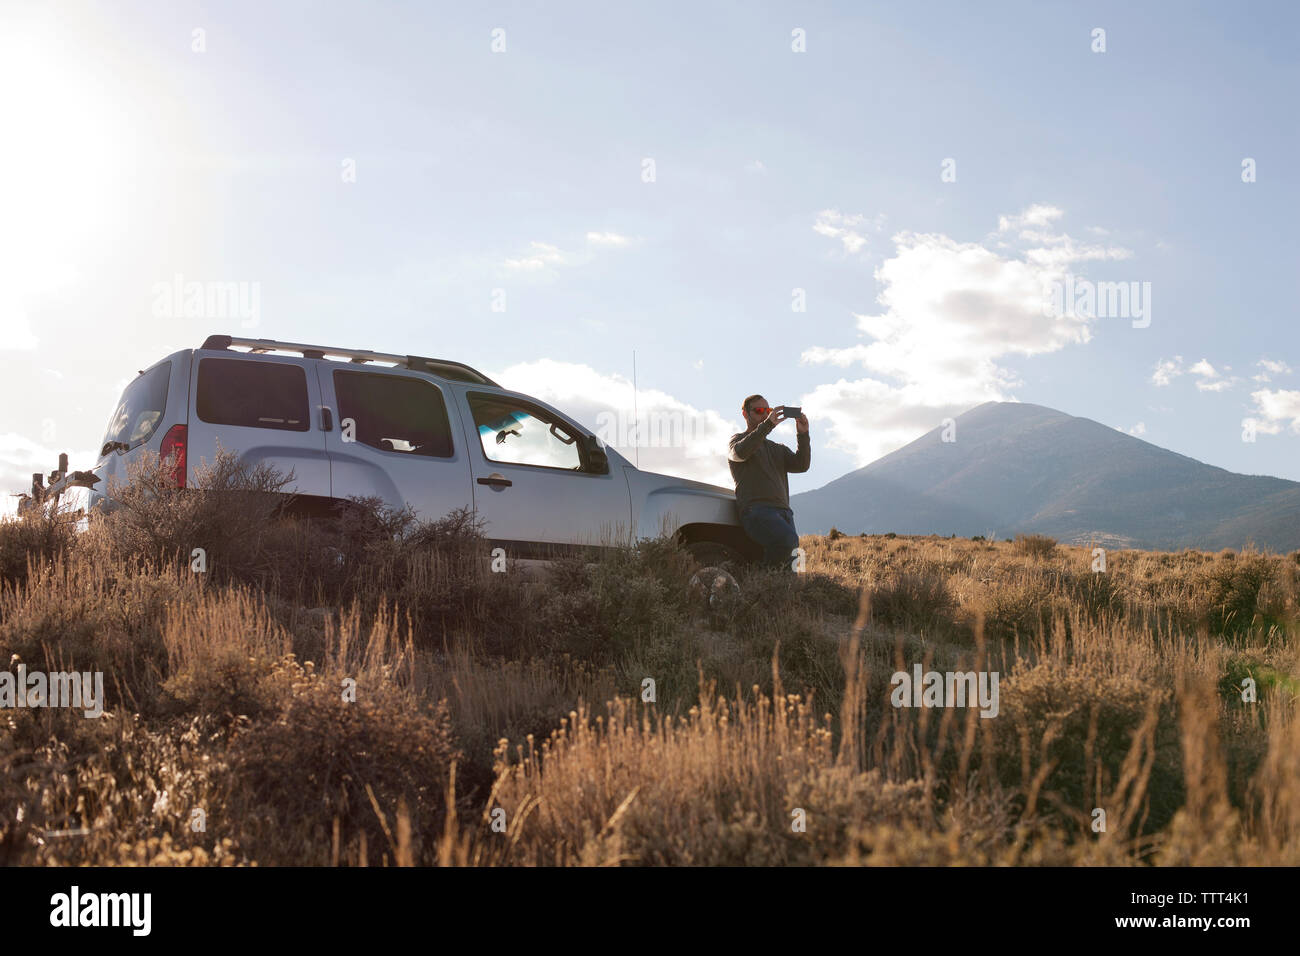 Man photographing while standing by car on field Stock Photo